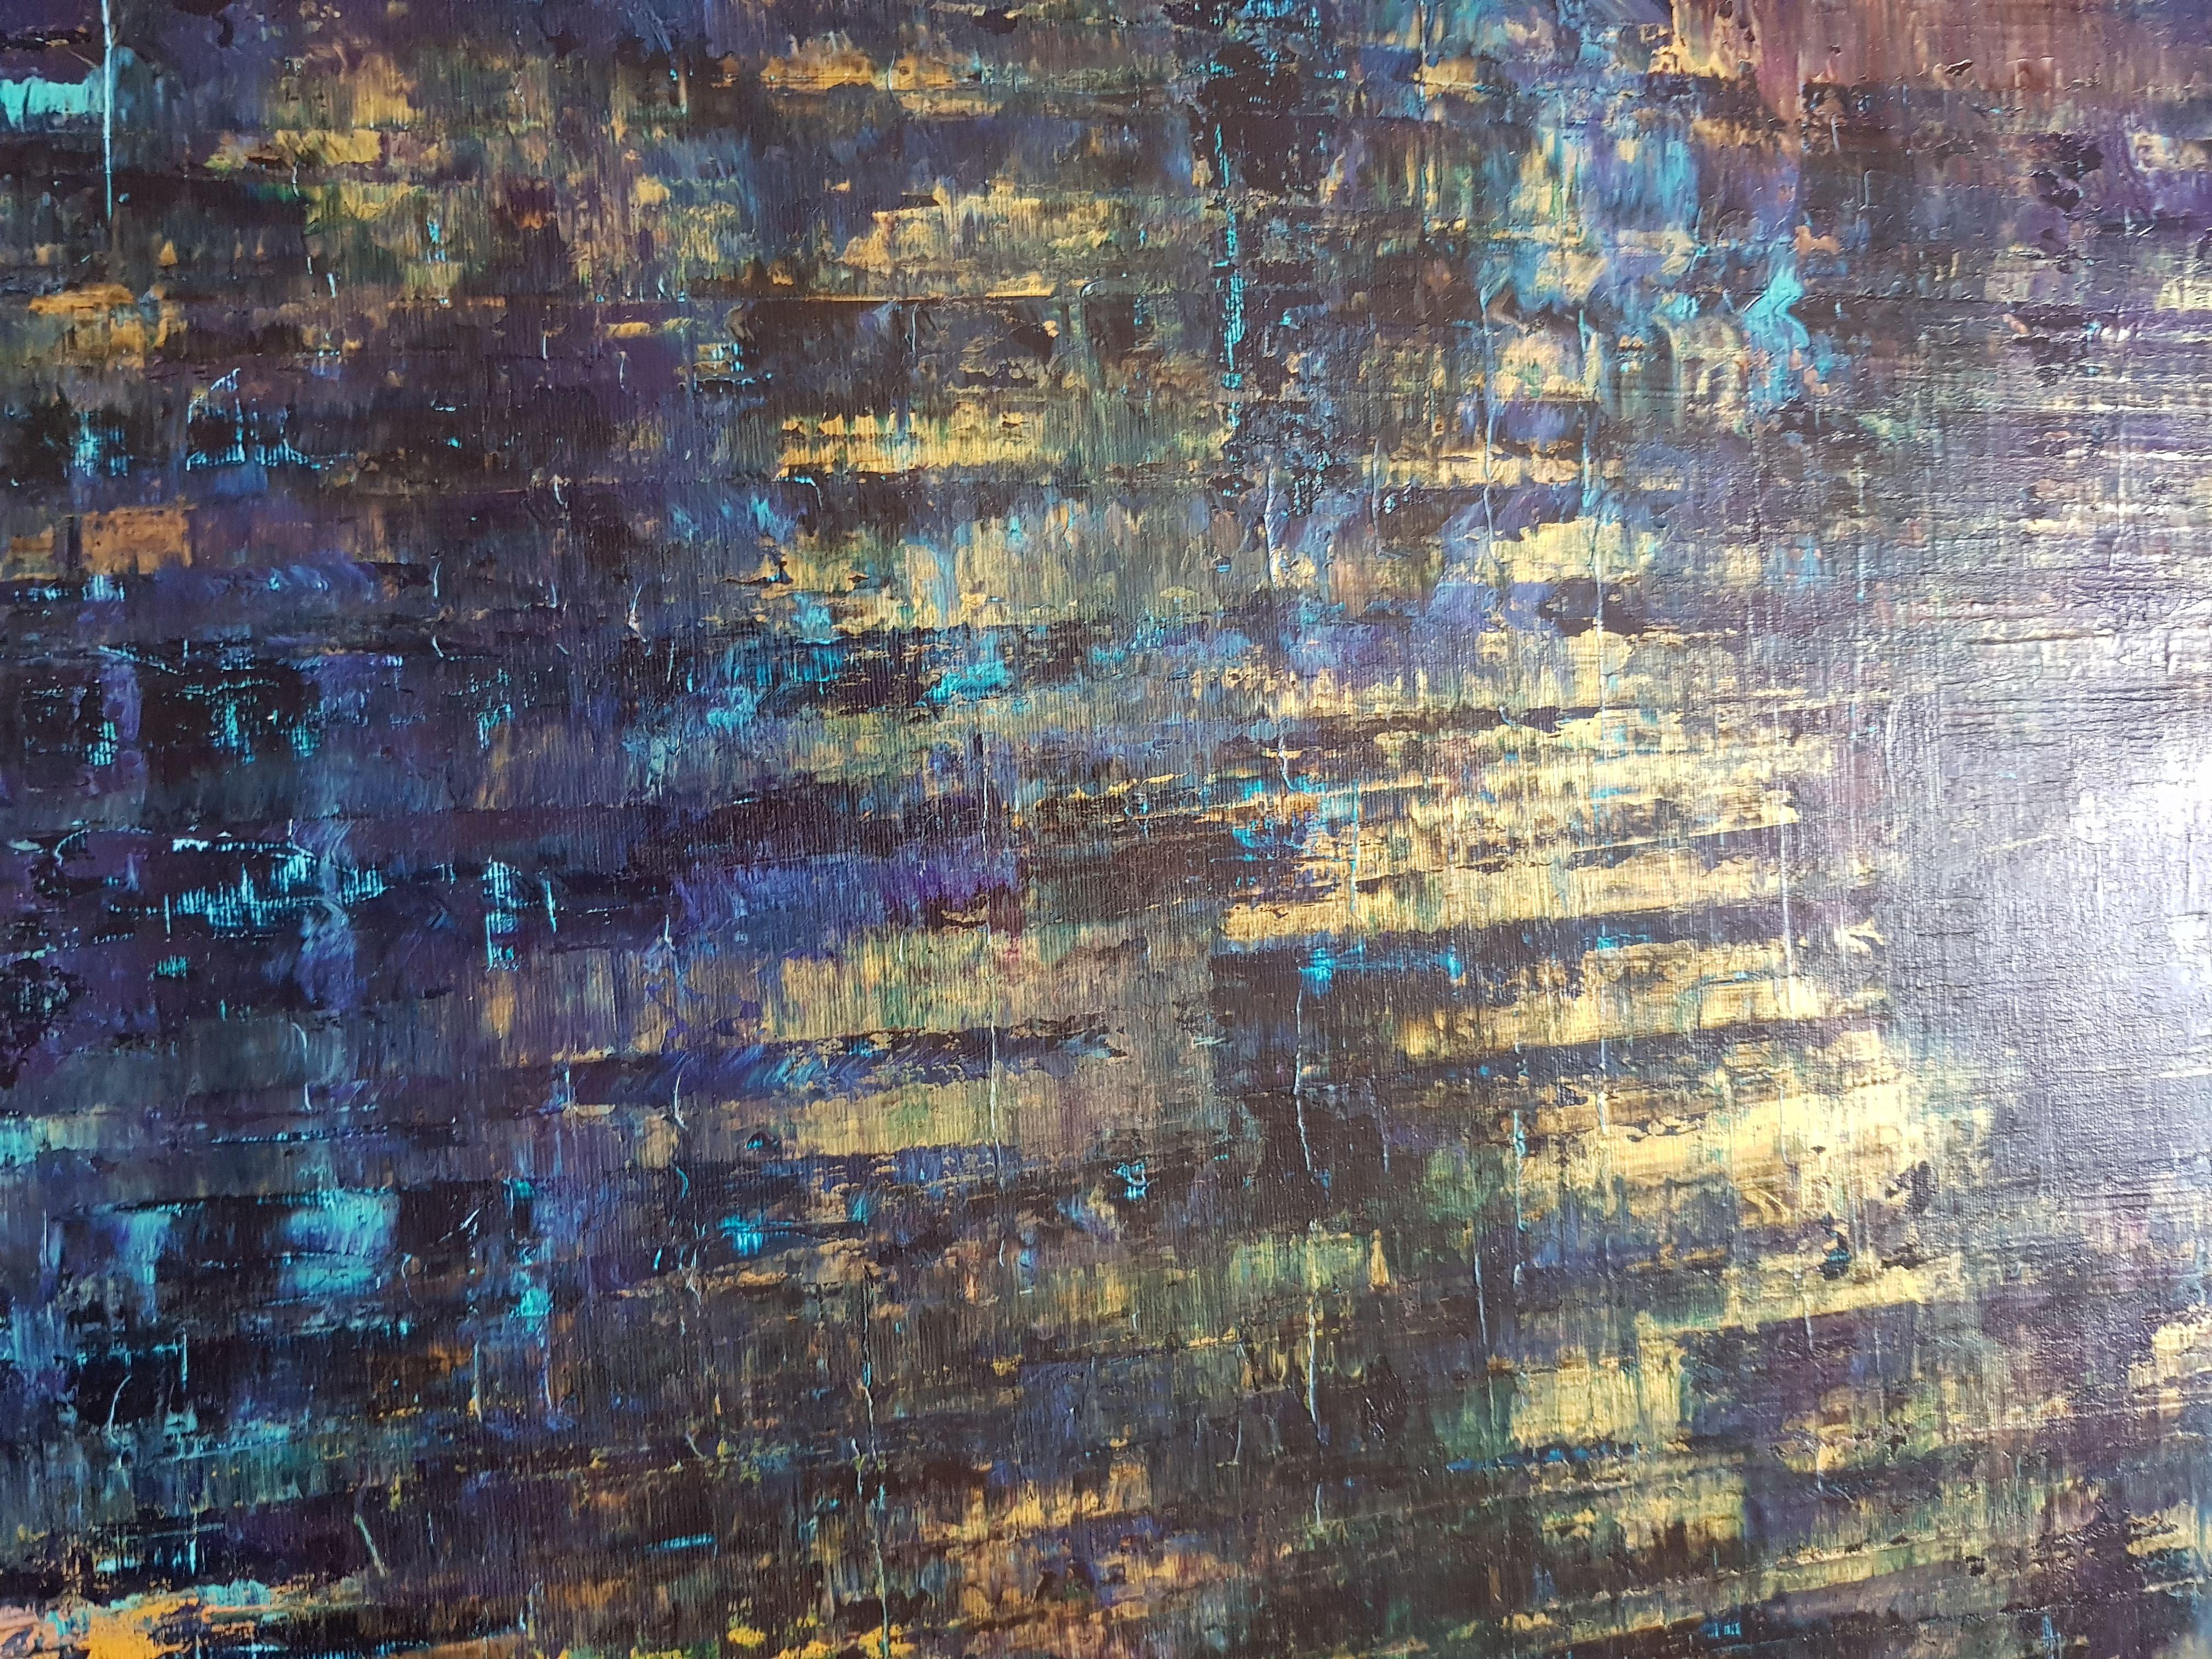 An original extra-large abstract landscape with a gentle texture.  Inspired by moonlight reflection on the pond, water lilies, a calm and peaceful evening.    Shades of blue, green, purple, orange, and pink with metallic golden change the look of